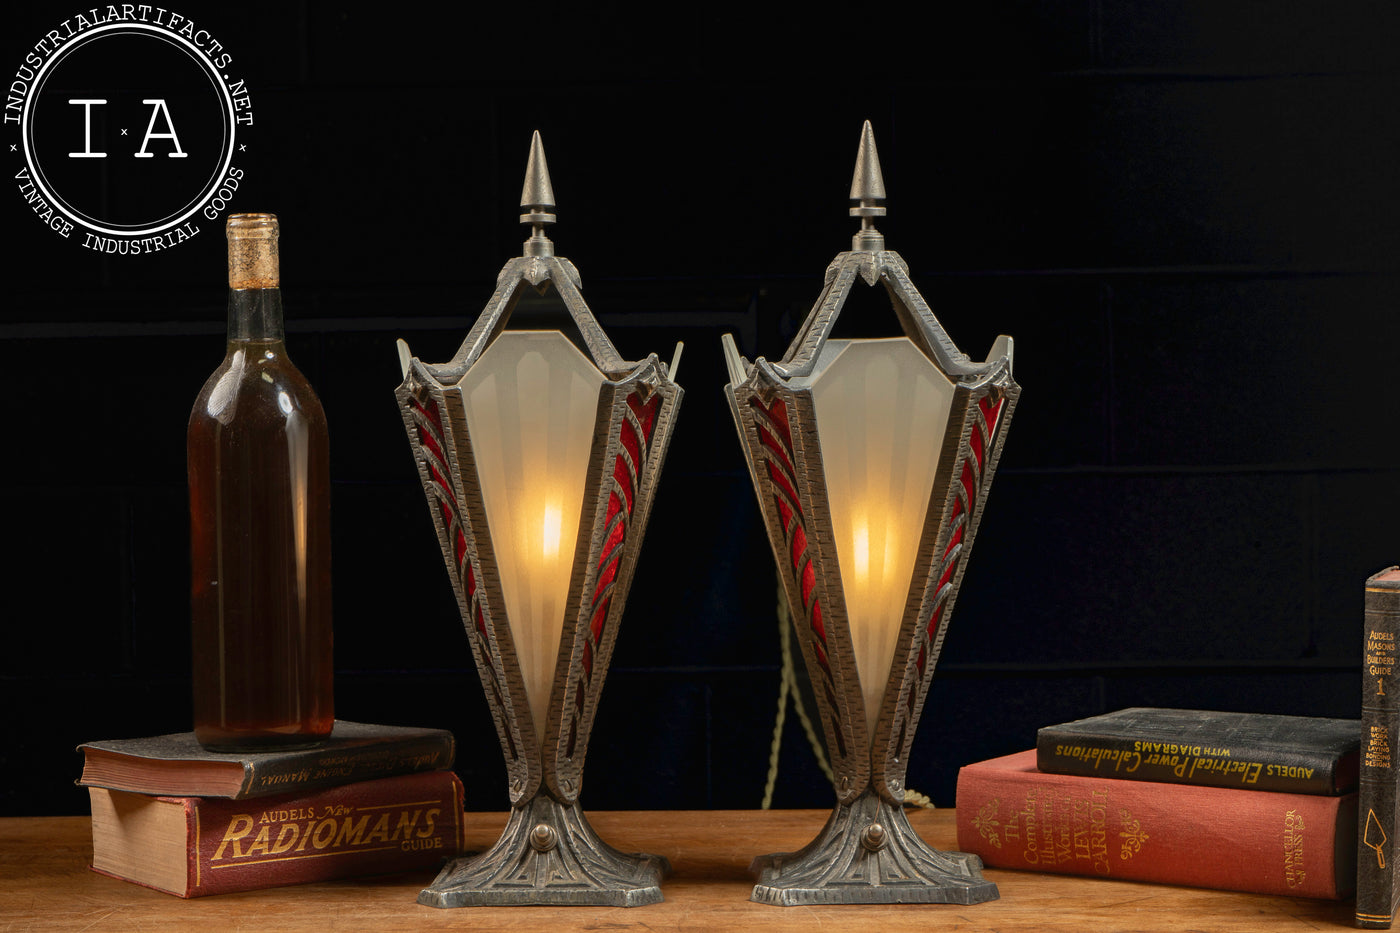 Pair of Art Deco Torchiere Table Lamps